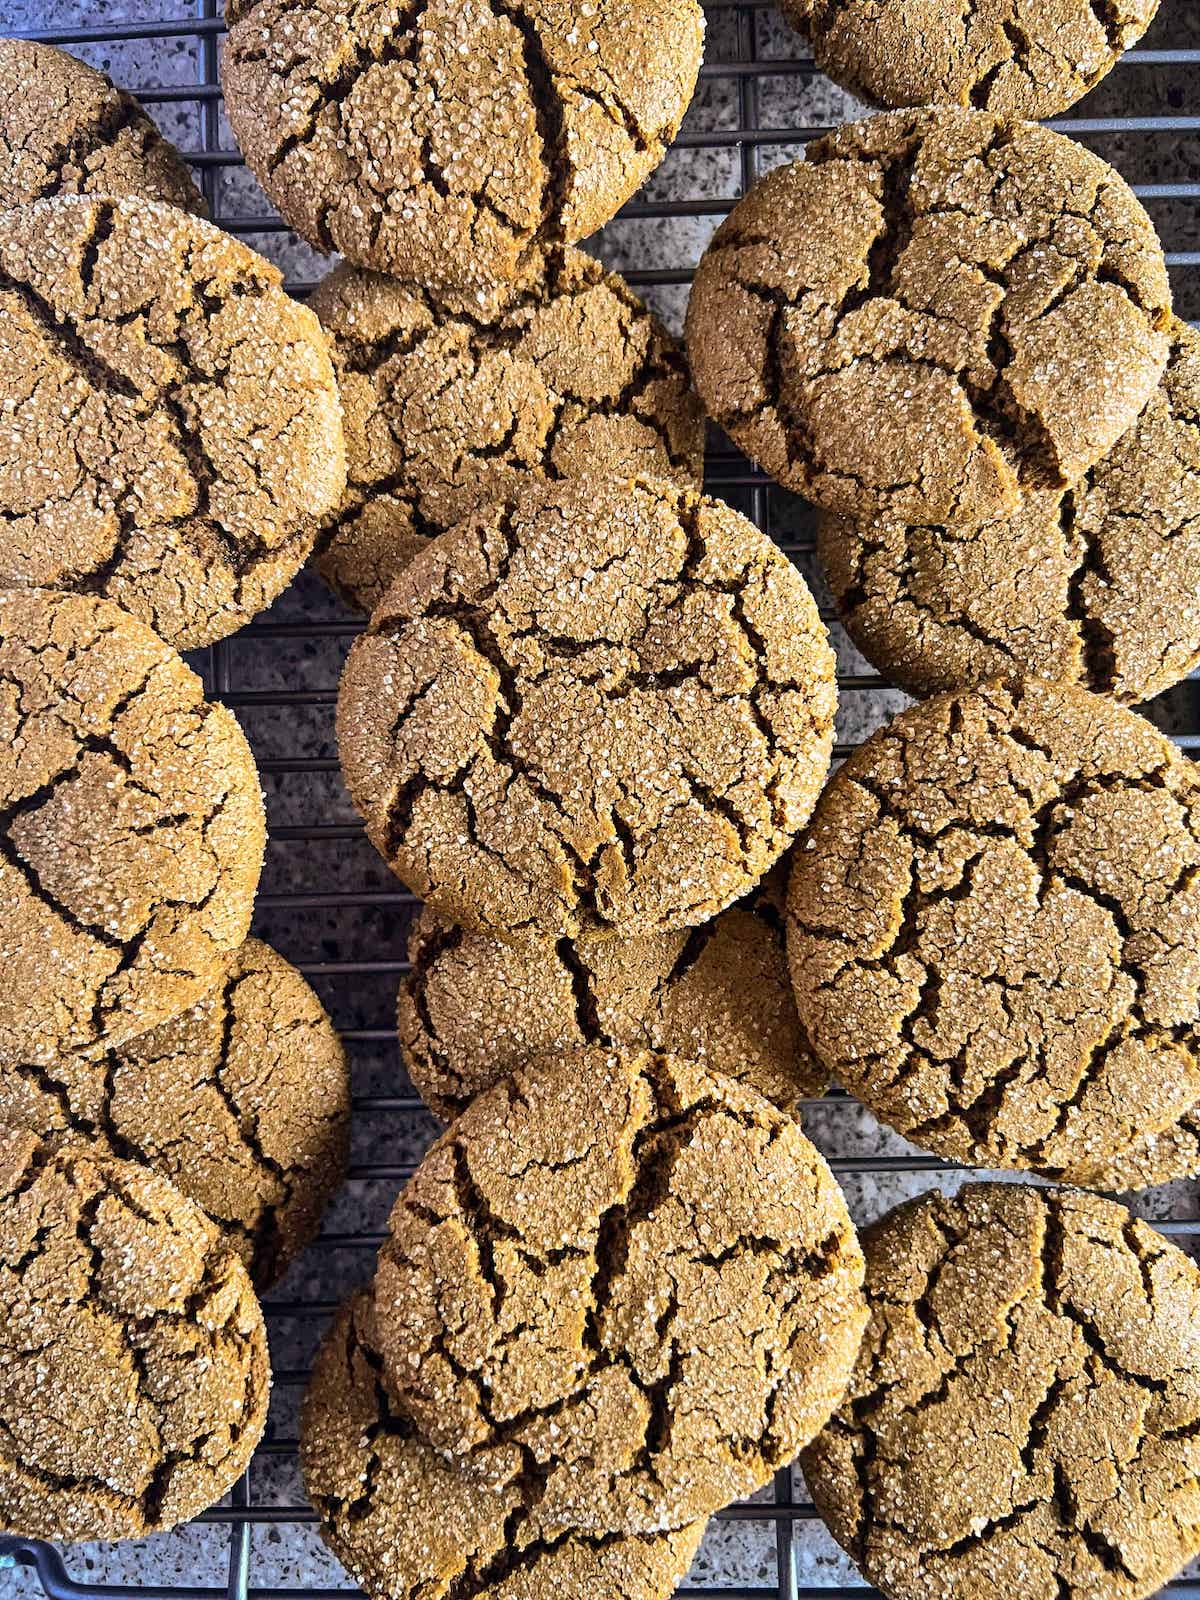 Molasses cookies piled on a wire cooling rack.